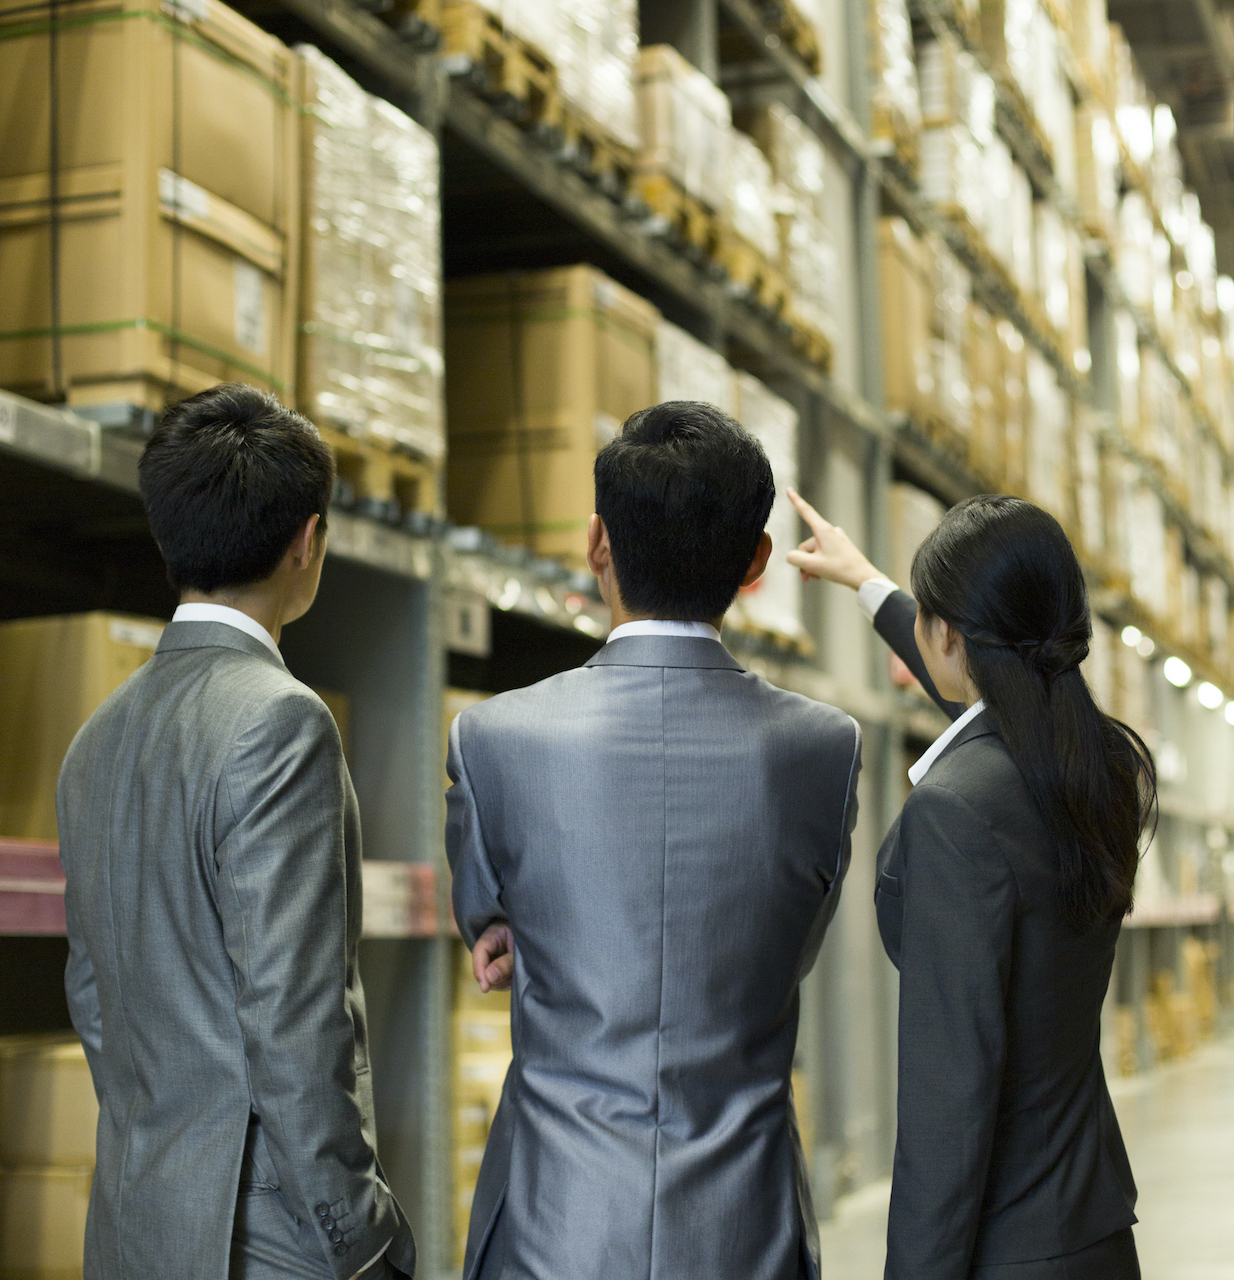 Improve Warehouse Efficiency. Chinese business people talking in warehouse